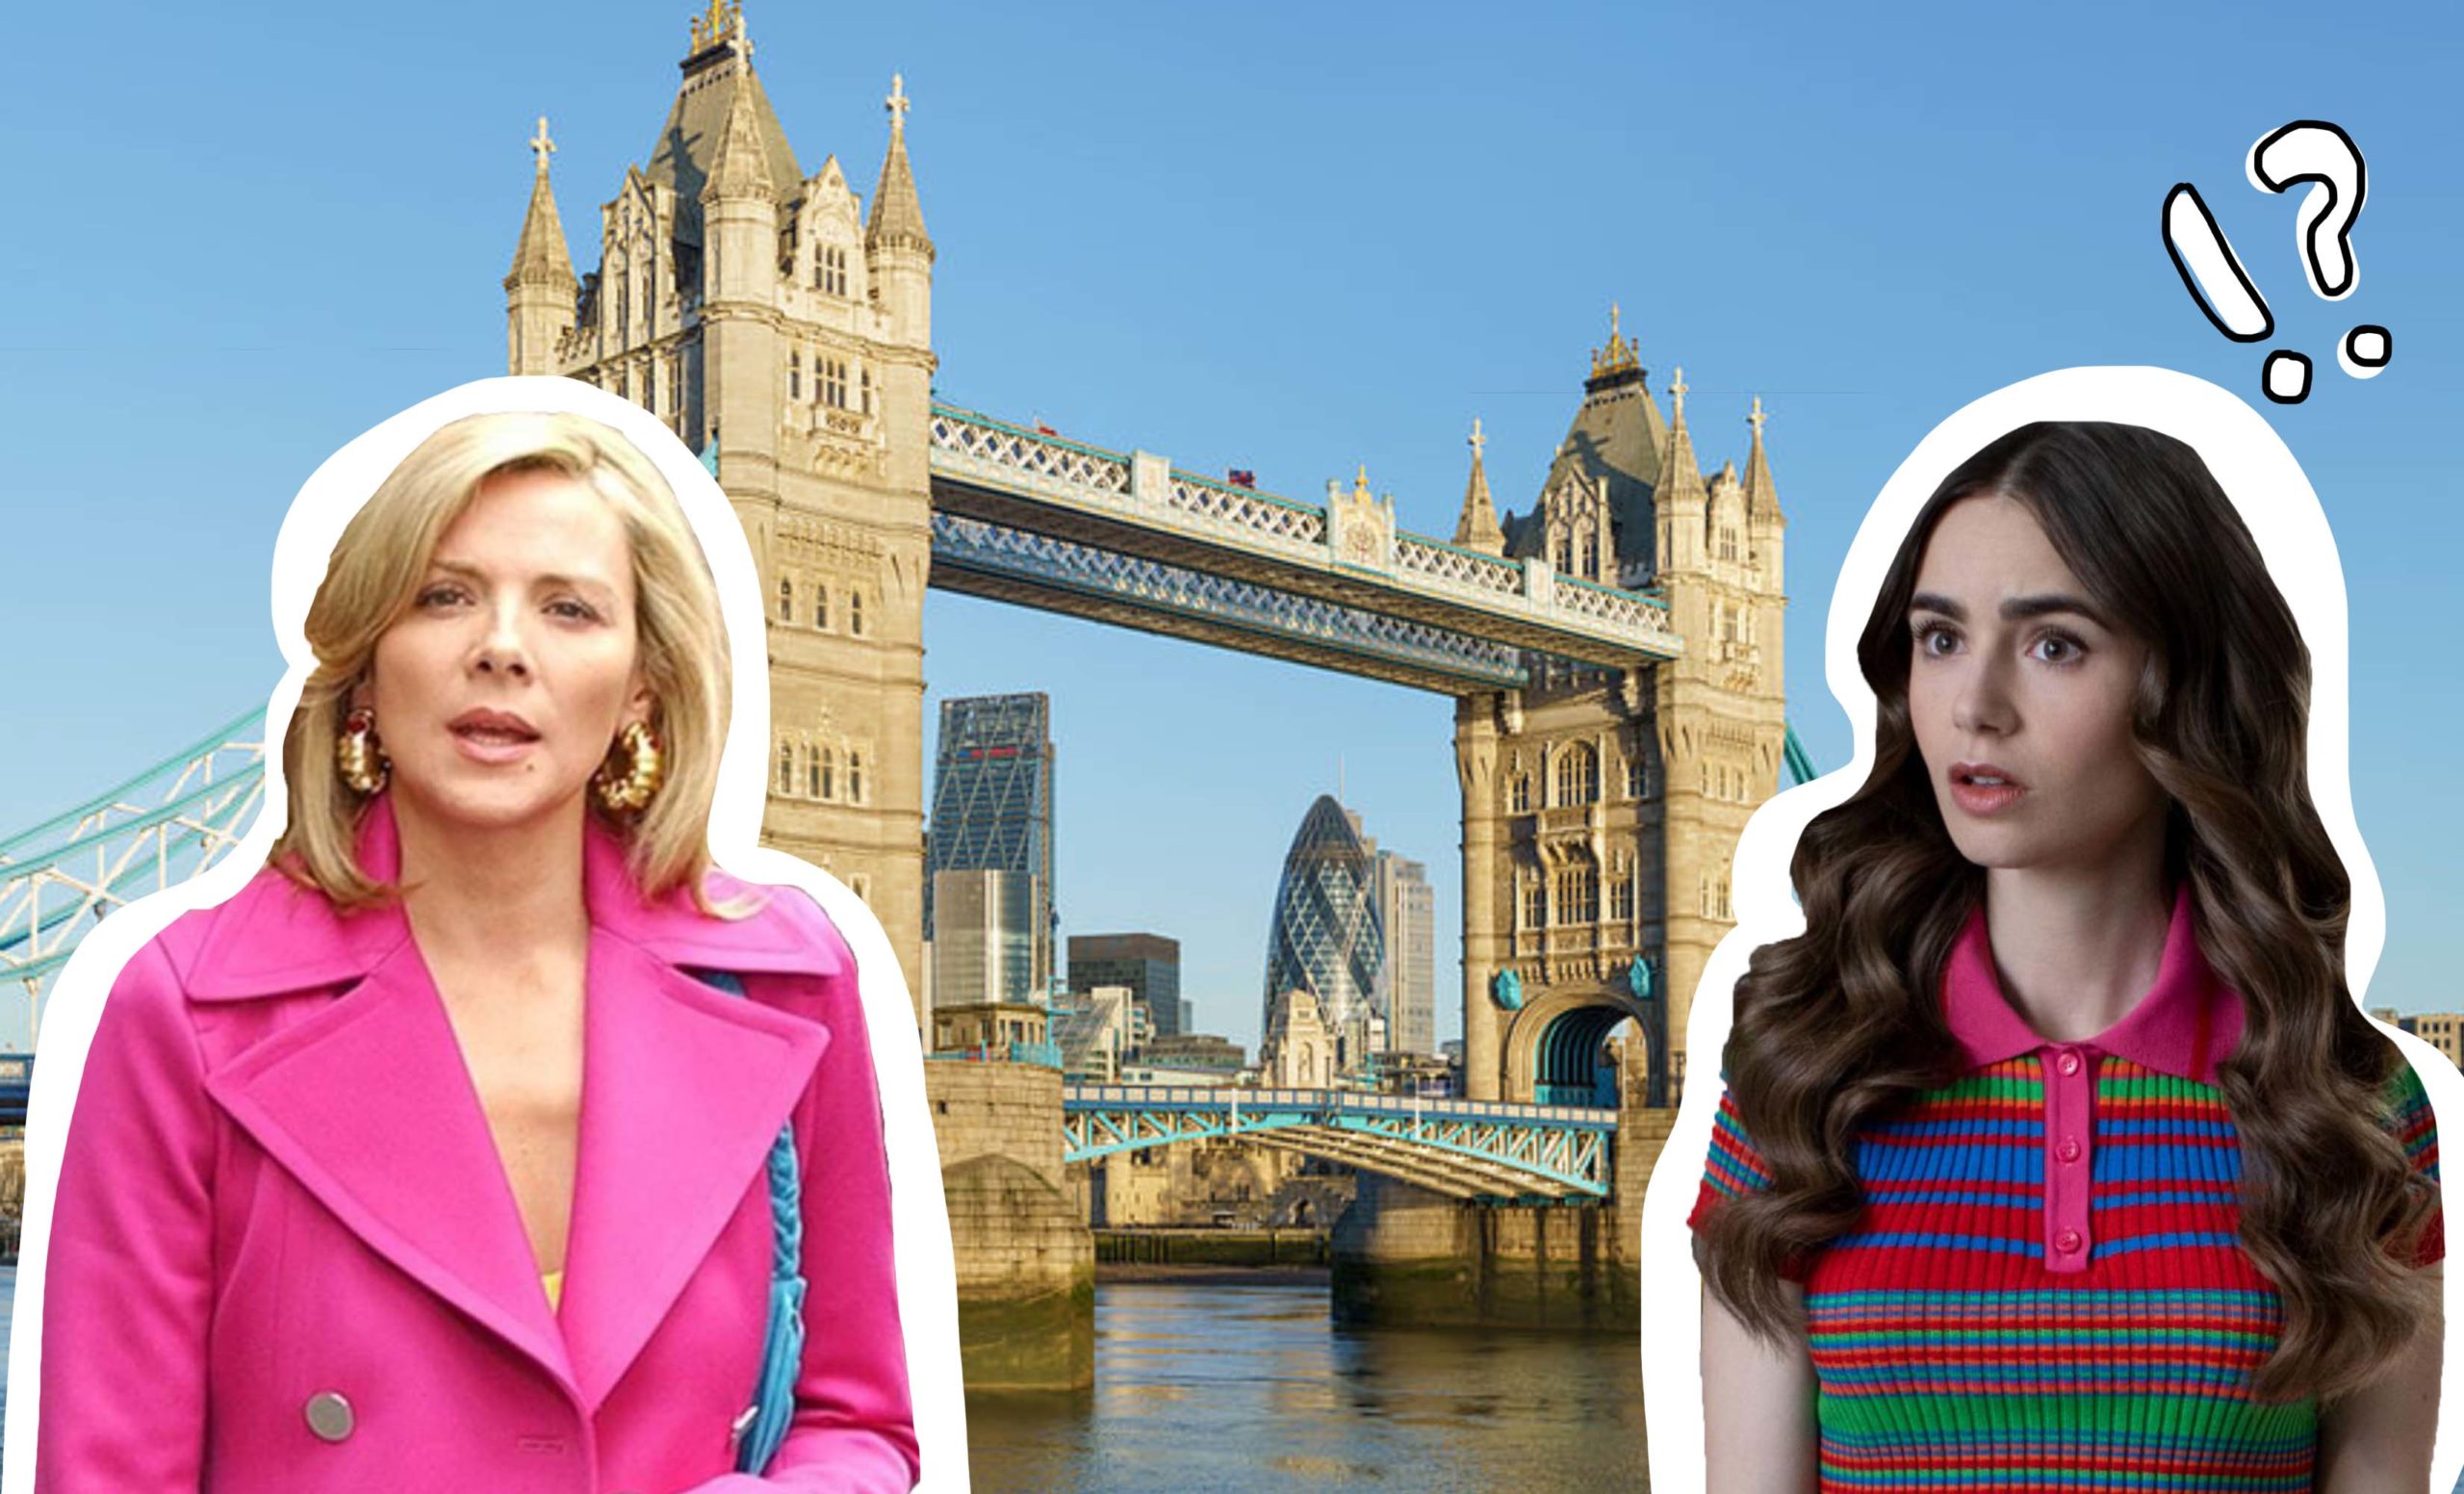 Fan Theory Suggests Samantha Jones From ‘Sex And The City’ Could Cameo In ‘Emily In Paris’ Season 3. Tv Gods, Make This Happen!